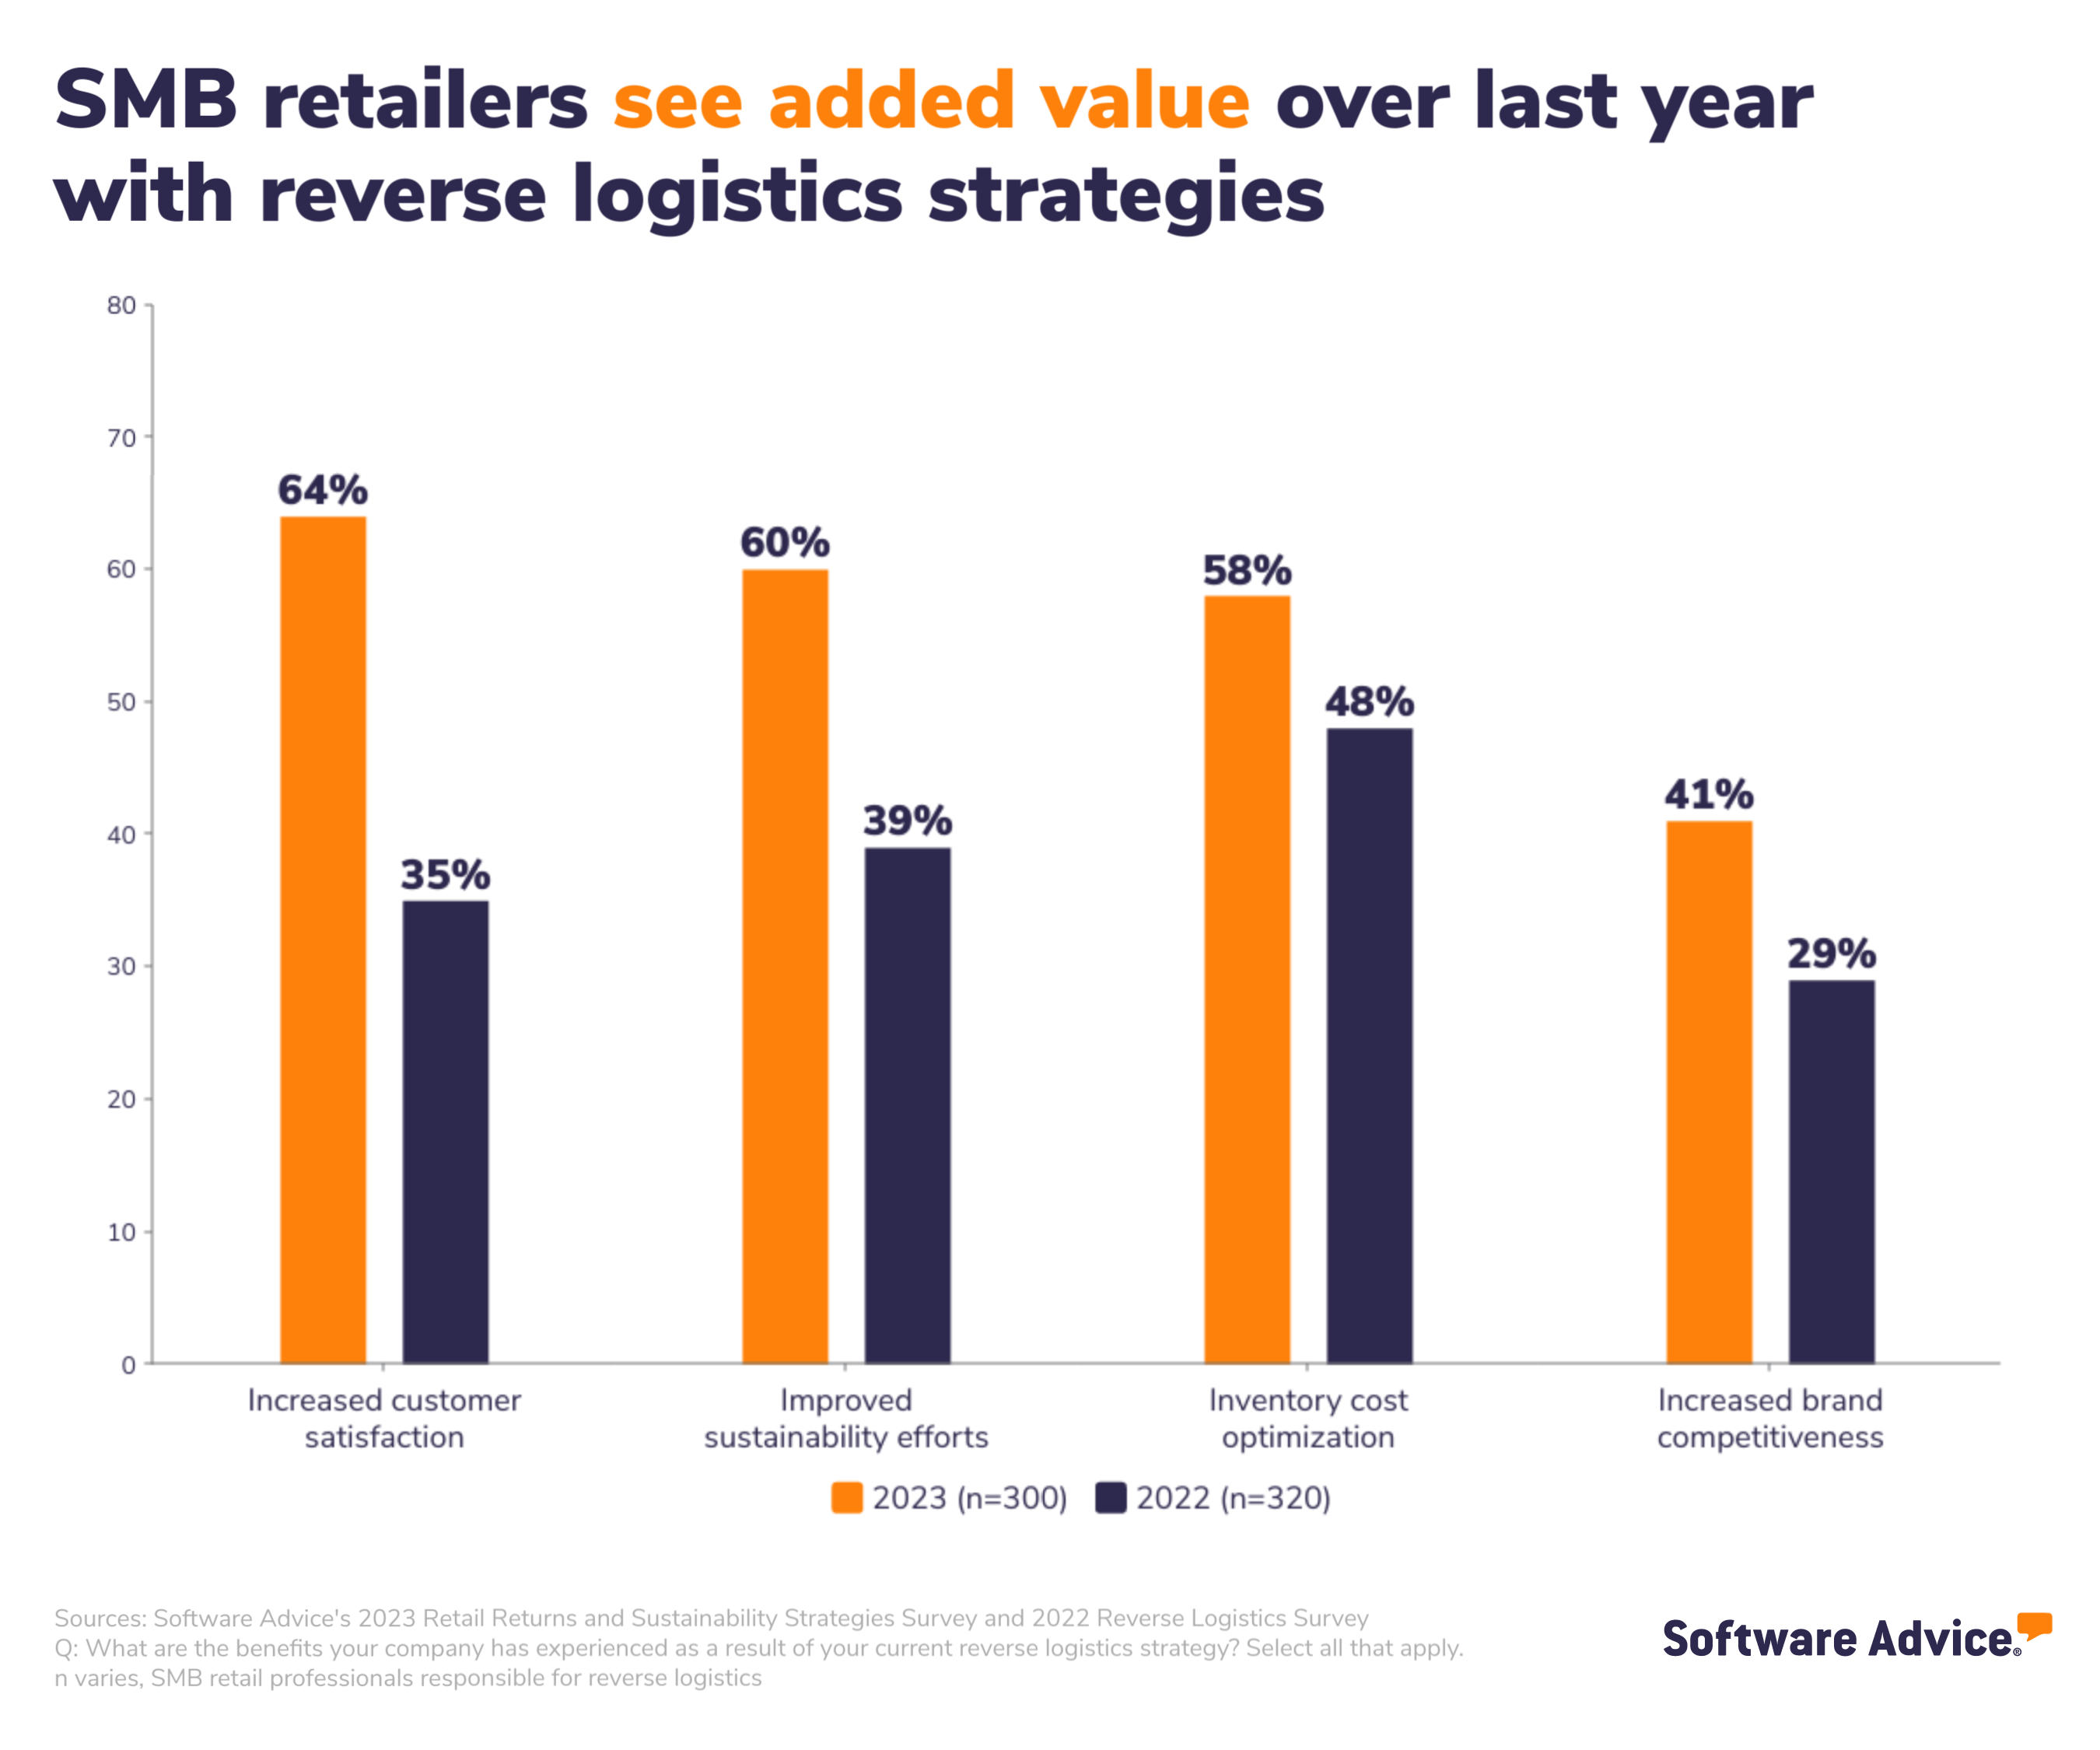 SMB retailers see added value over last year with their reverse logistics strategies.